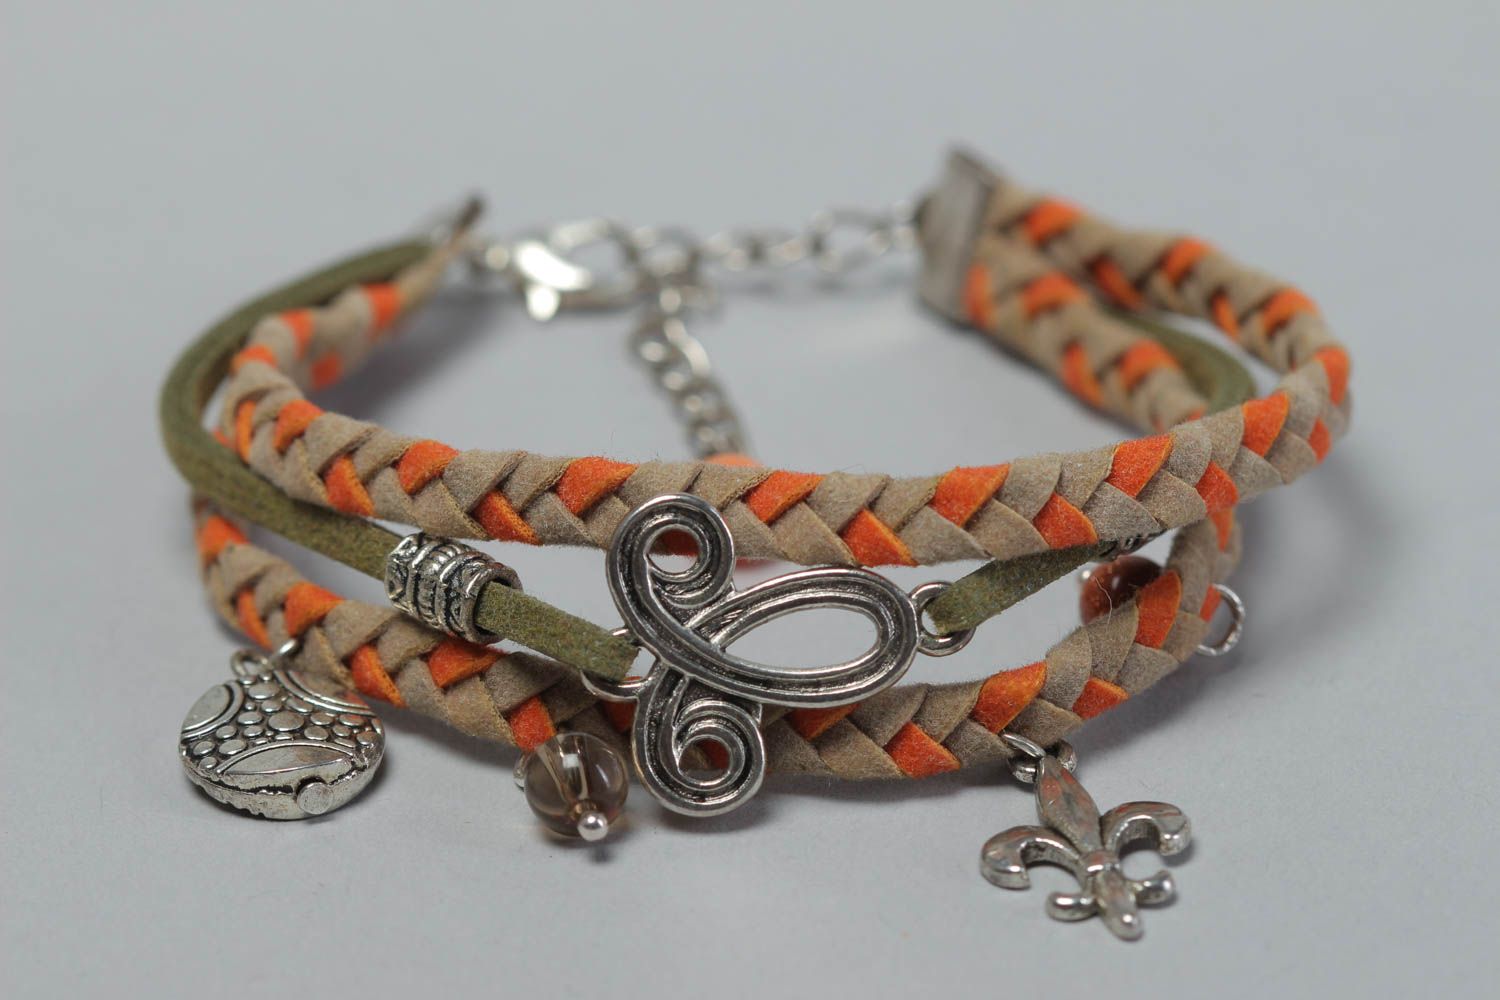 Handmade braided leather bracelet with metal charms fashion jewelry gift ideas photo 3